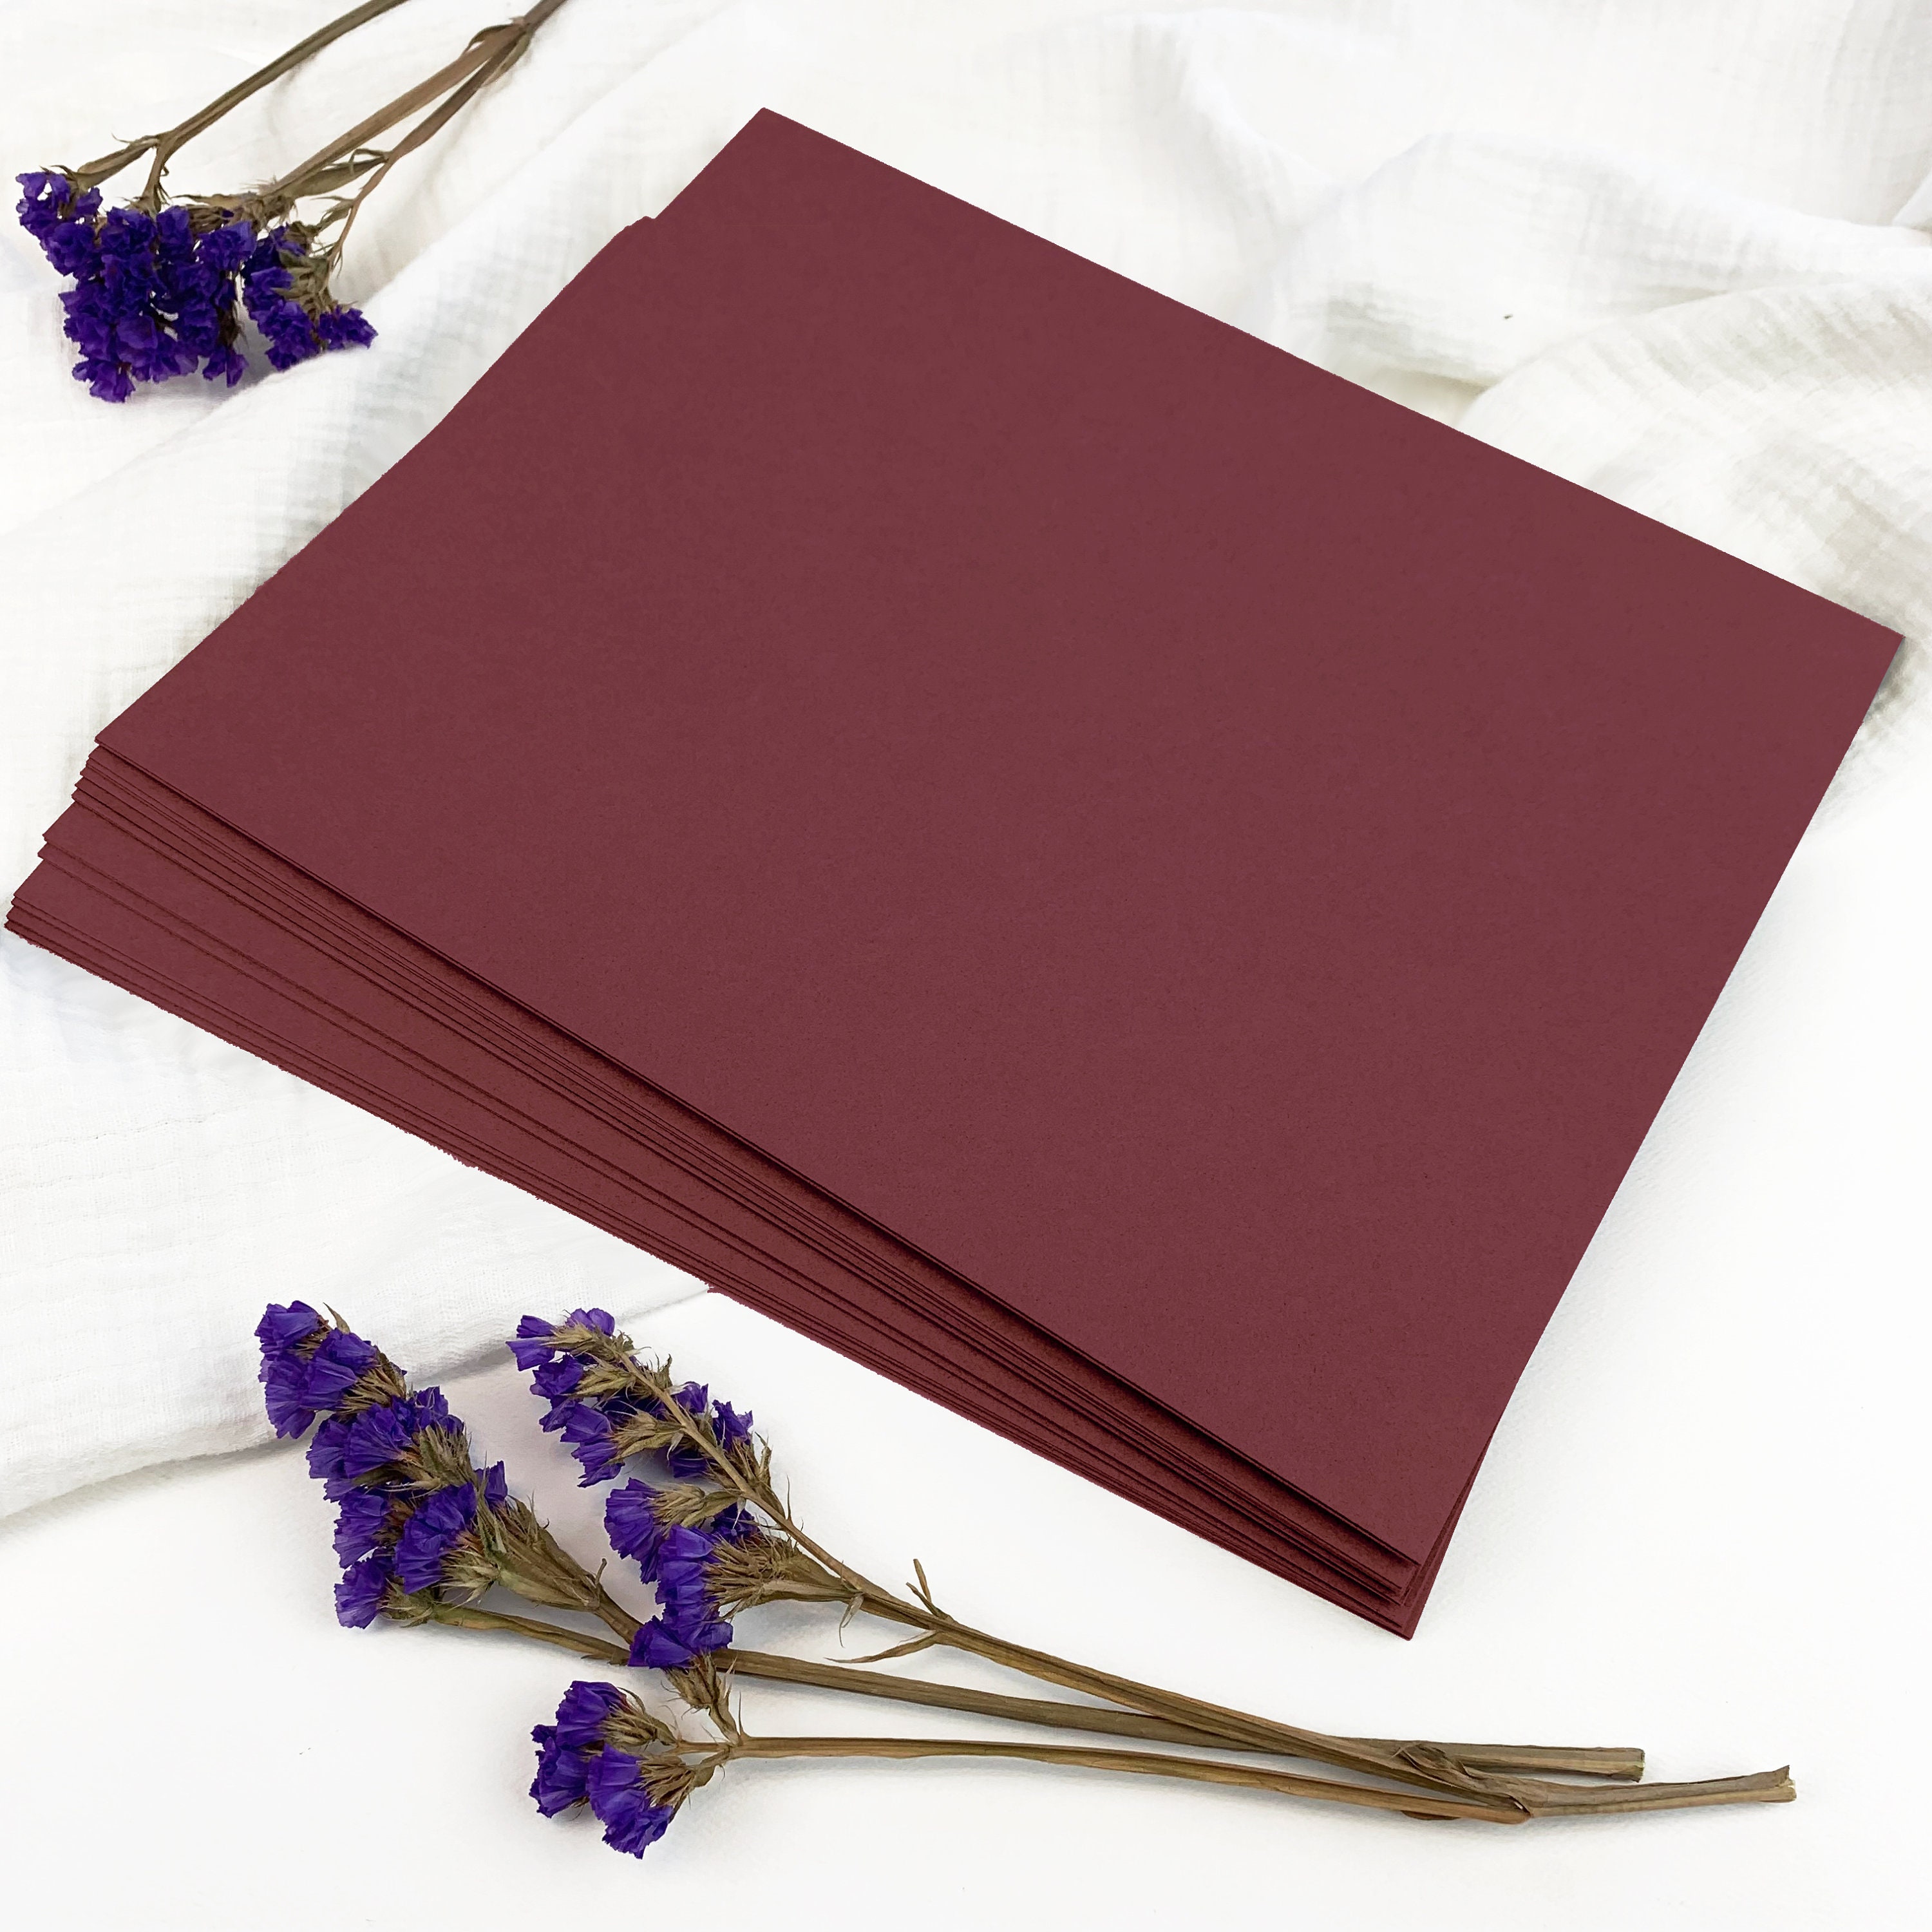 Premium Cardstock Paper 8.5 X 11 In. Red & Maroon 65 Lb. Cover Weight  Perfect for Scrapbooking and Cardmaking 